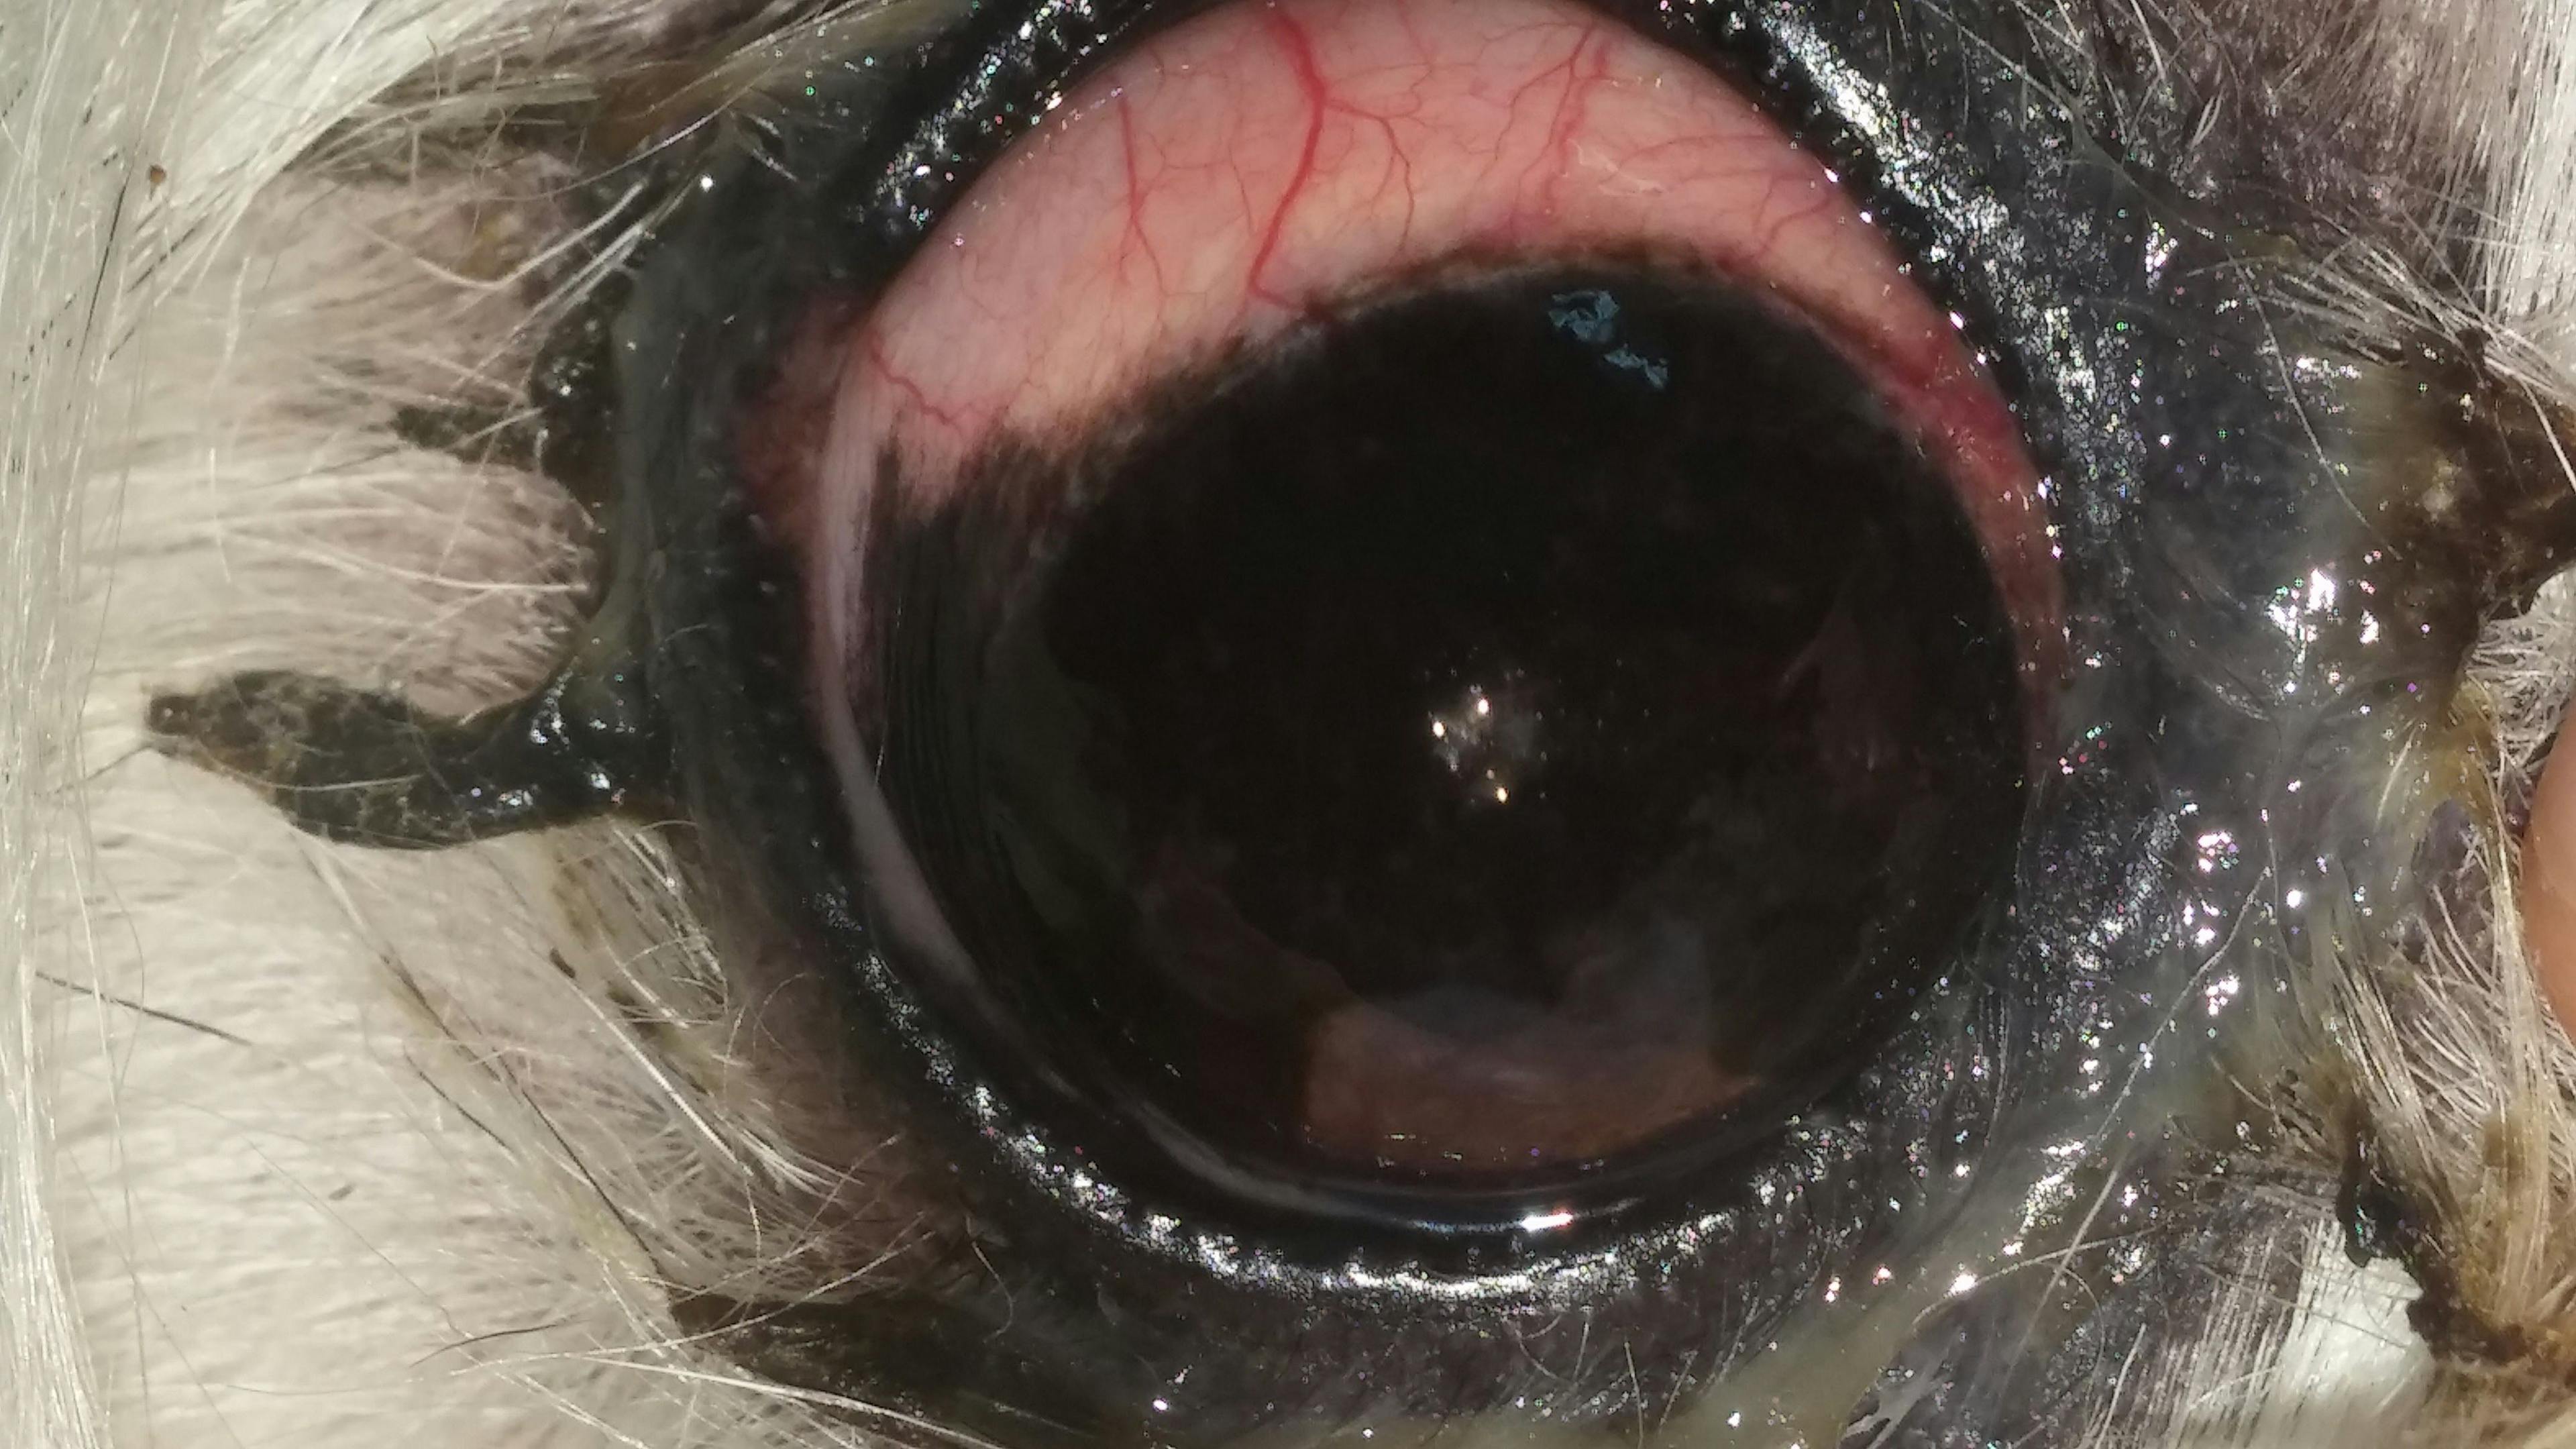 Figure 6. The cornea of this dog is not transparent, which is a consequence of severe pigmentation due to chronic keratoconjunctivitis sicca (dry eye).